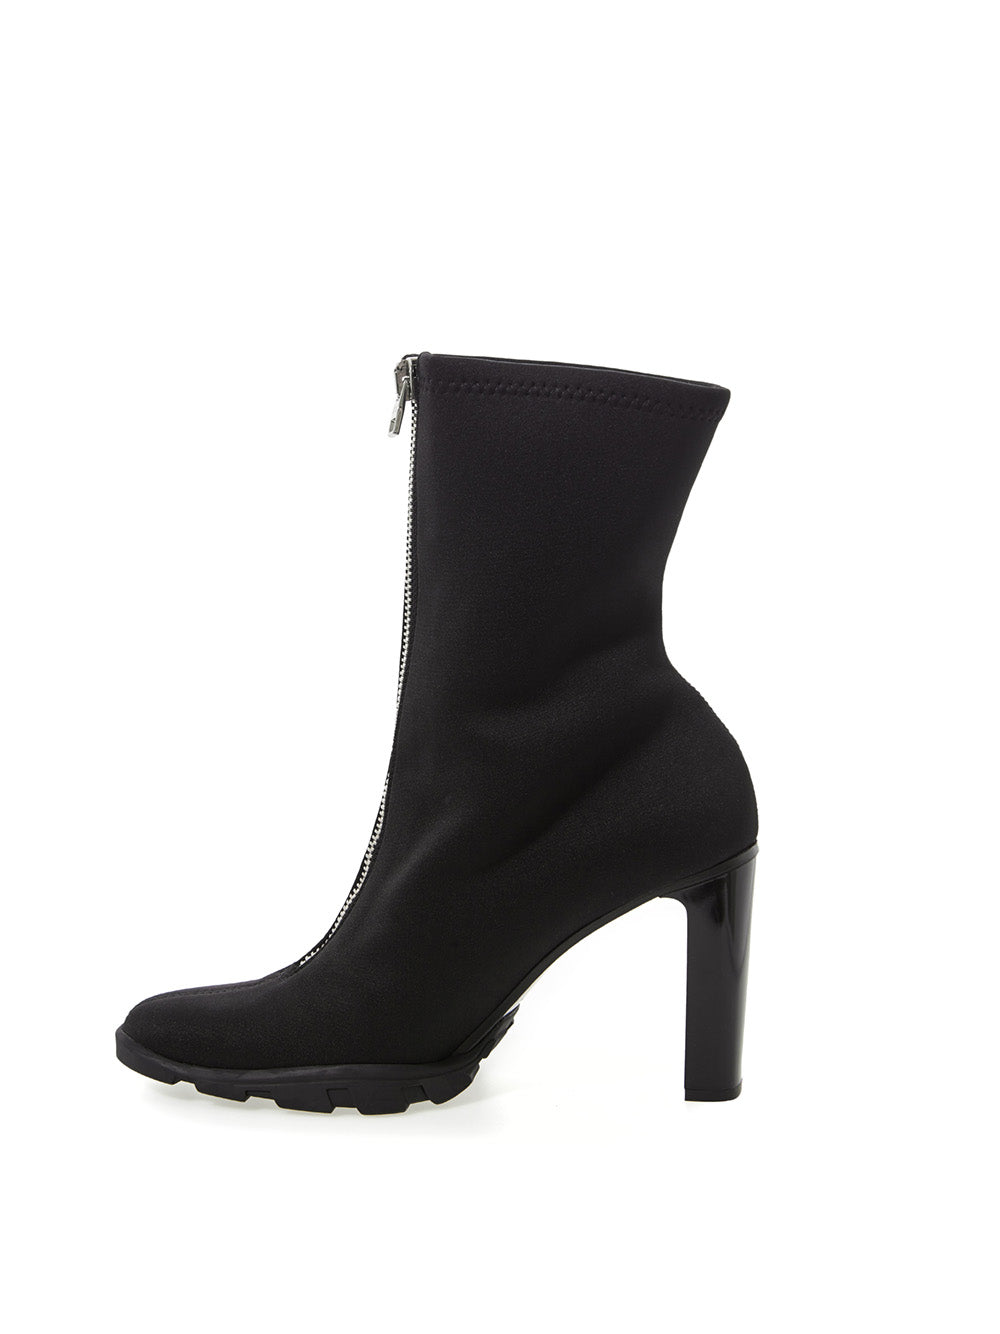 Slim Tread ankle boots by Alexander McQueen